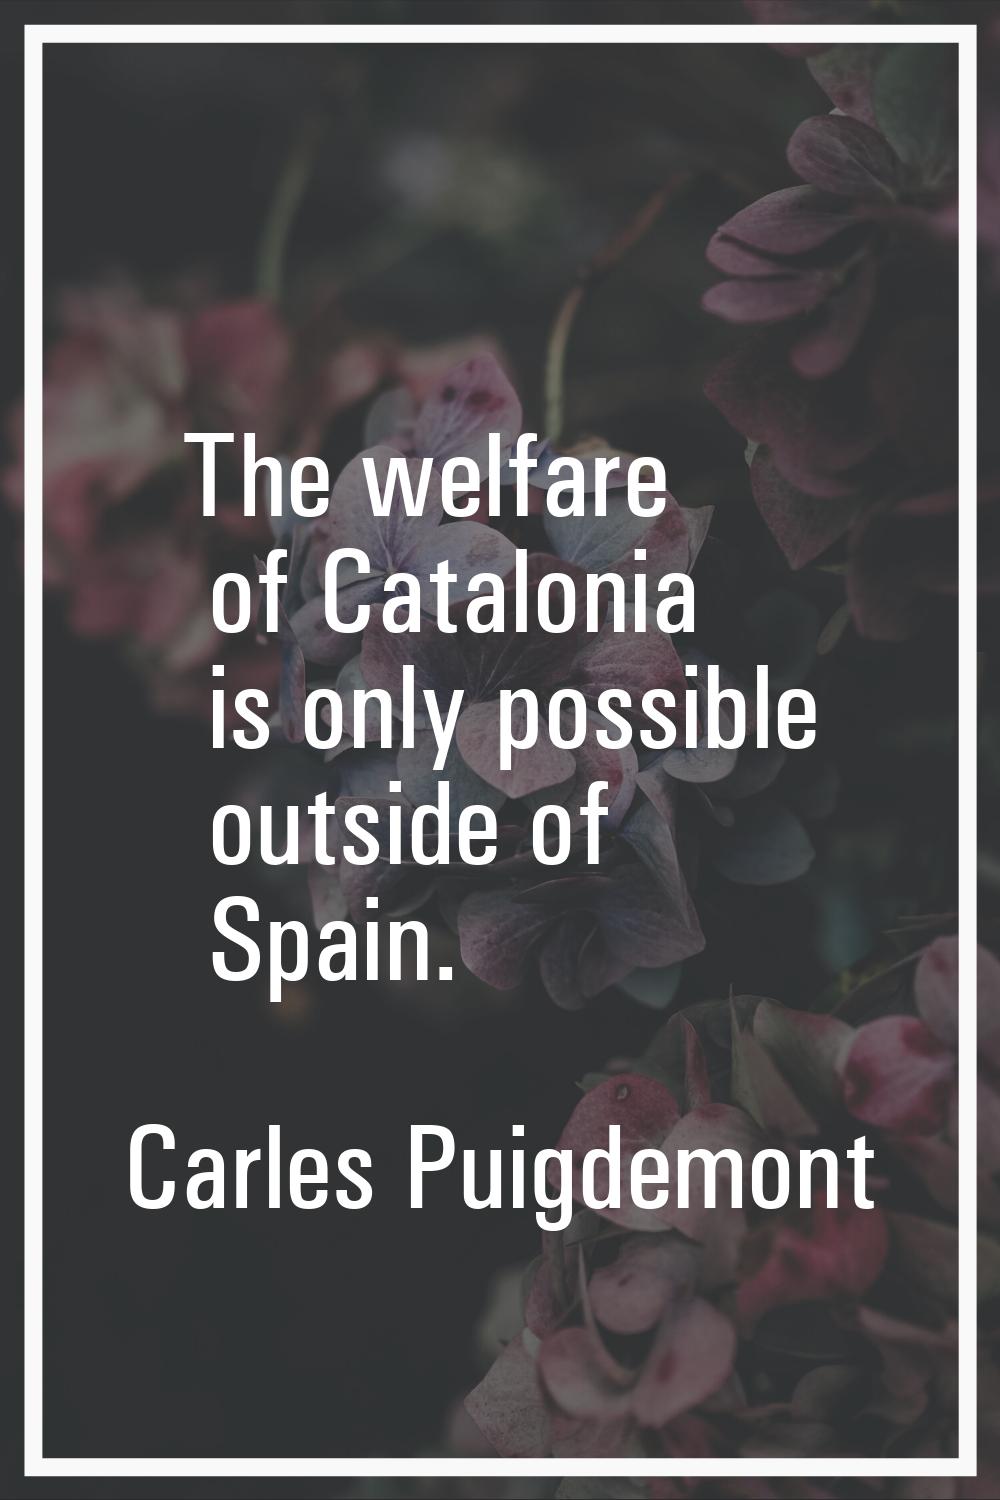 The welfare of Catalonia is only possible outside of Spain.